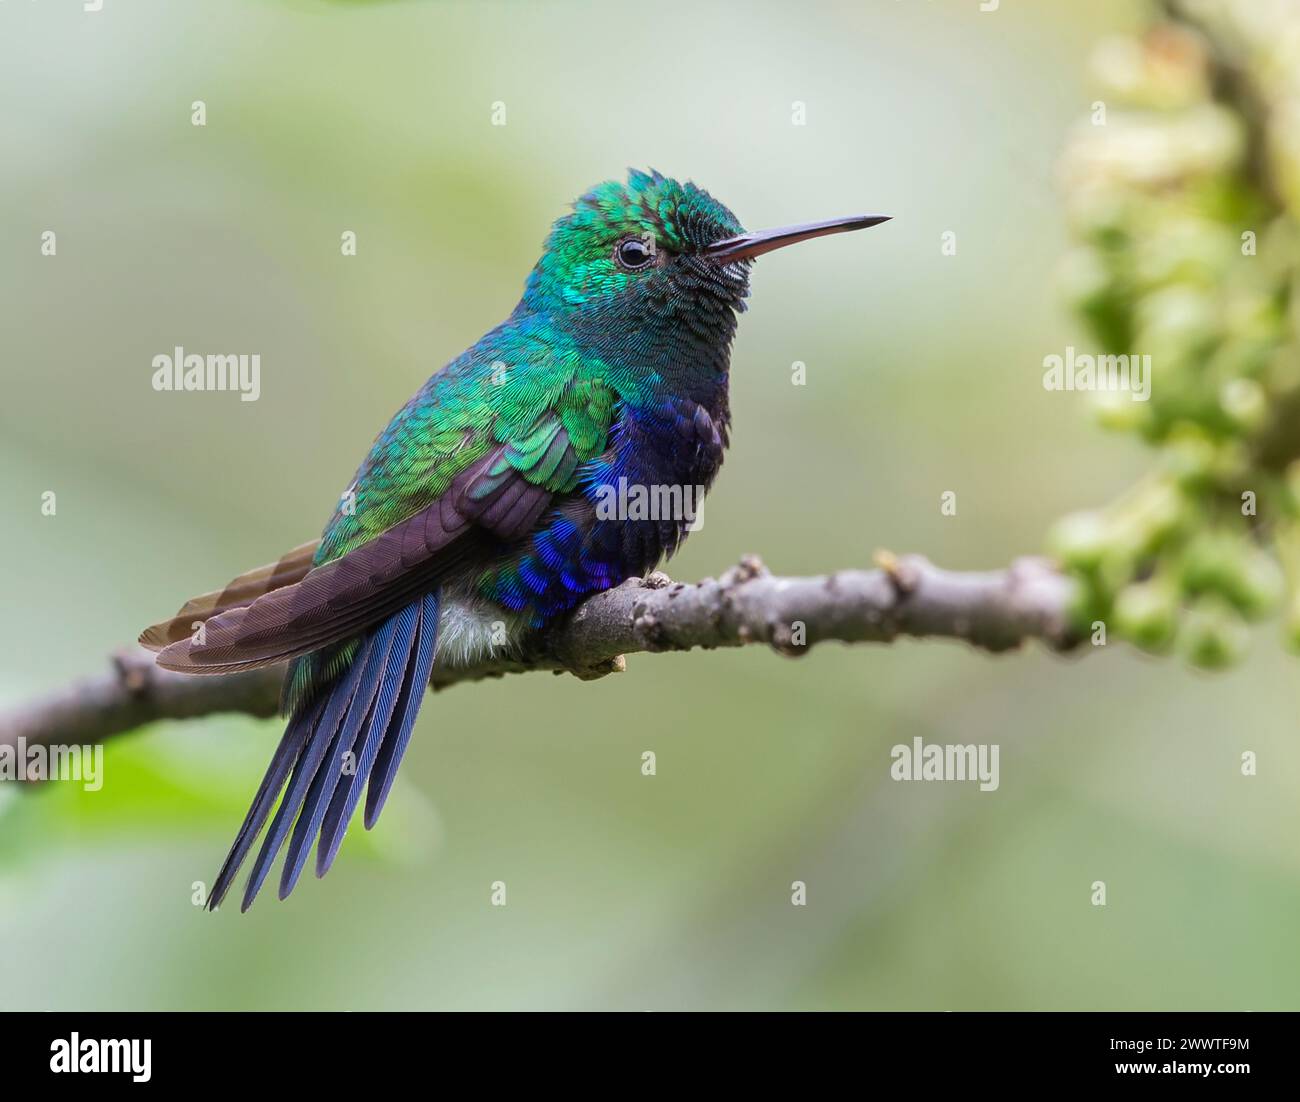 Violet-bellied Hummingbird (Amazilia julie feliciana, Chlorestes julie feliciana, Juliamyia julie feliciana), male perched on a branch, Colombia Stock Photo